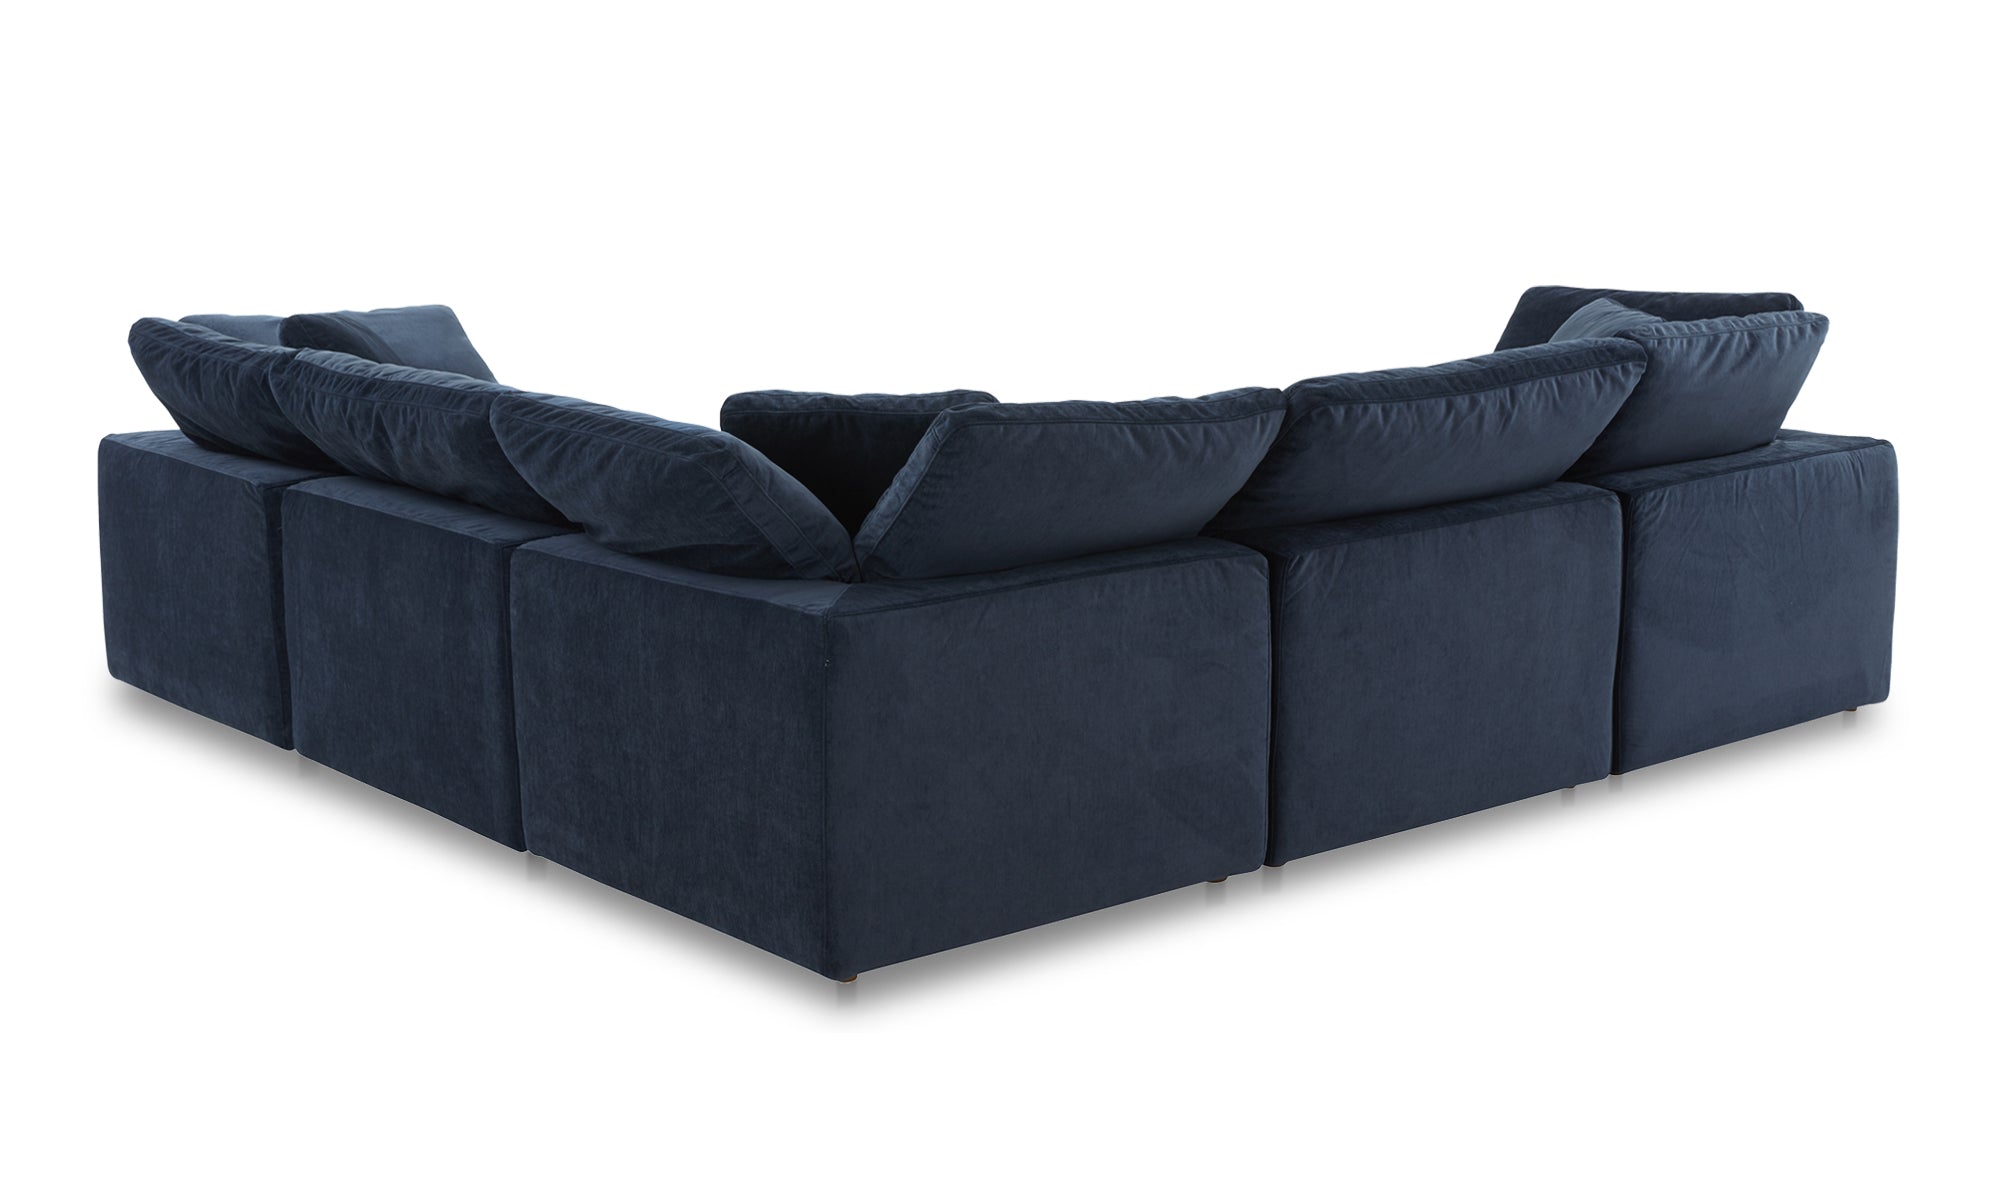 Terra Classic L Modular Sectional Performance Fabric - Nocturnal Sky